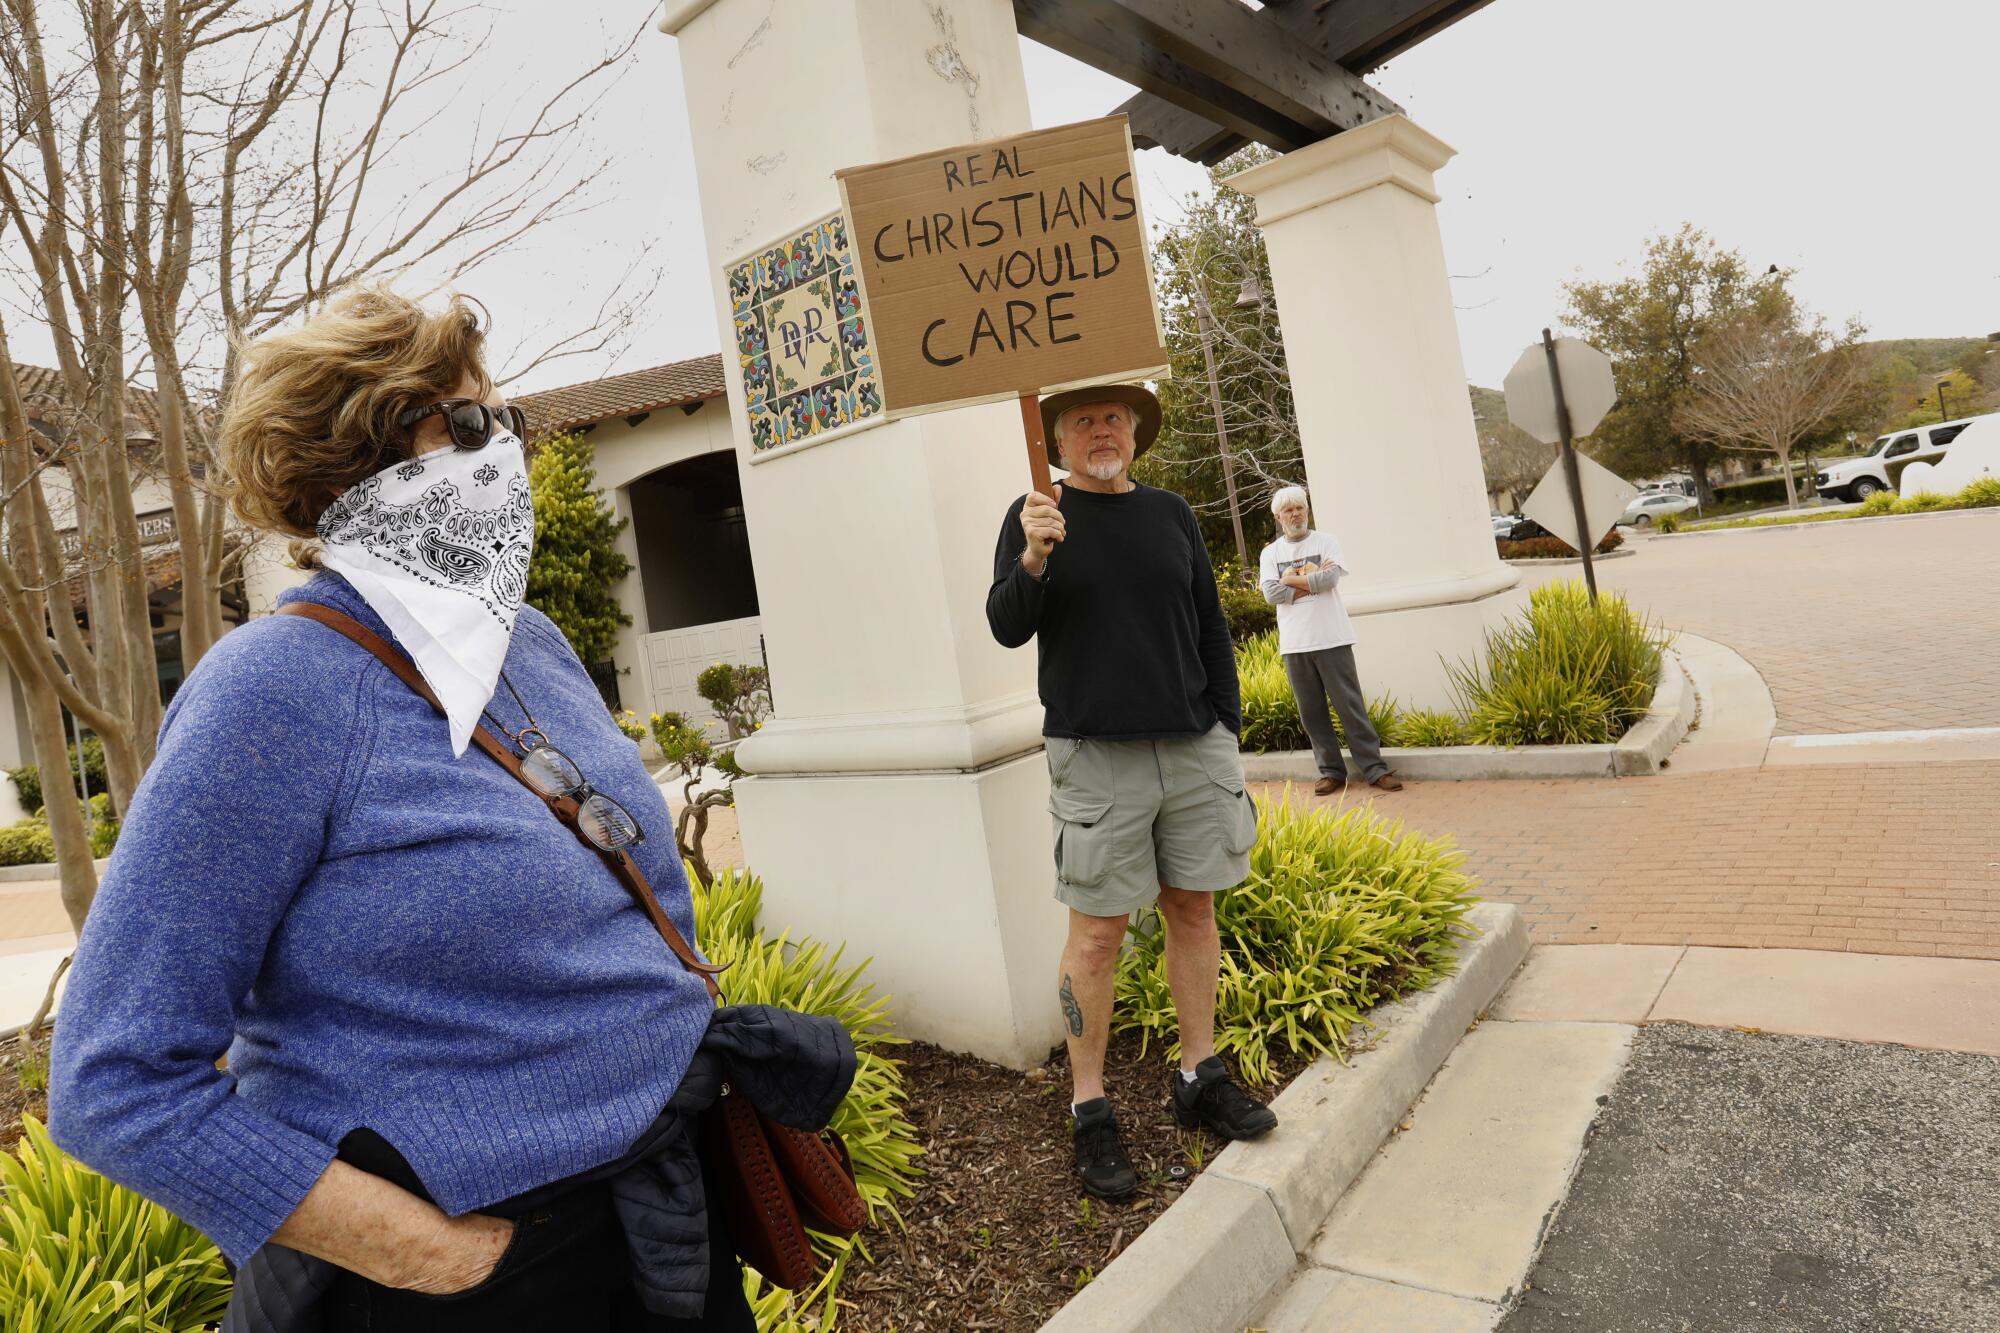 About 20 people, including Catherine Saillant, left, protested outside Godspeak Calvary Chapel in opposition to Communion being given inside.